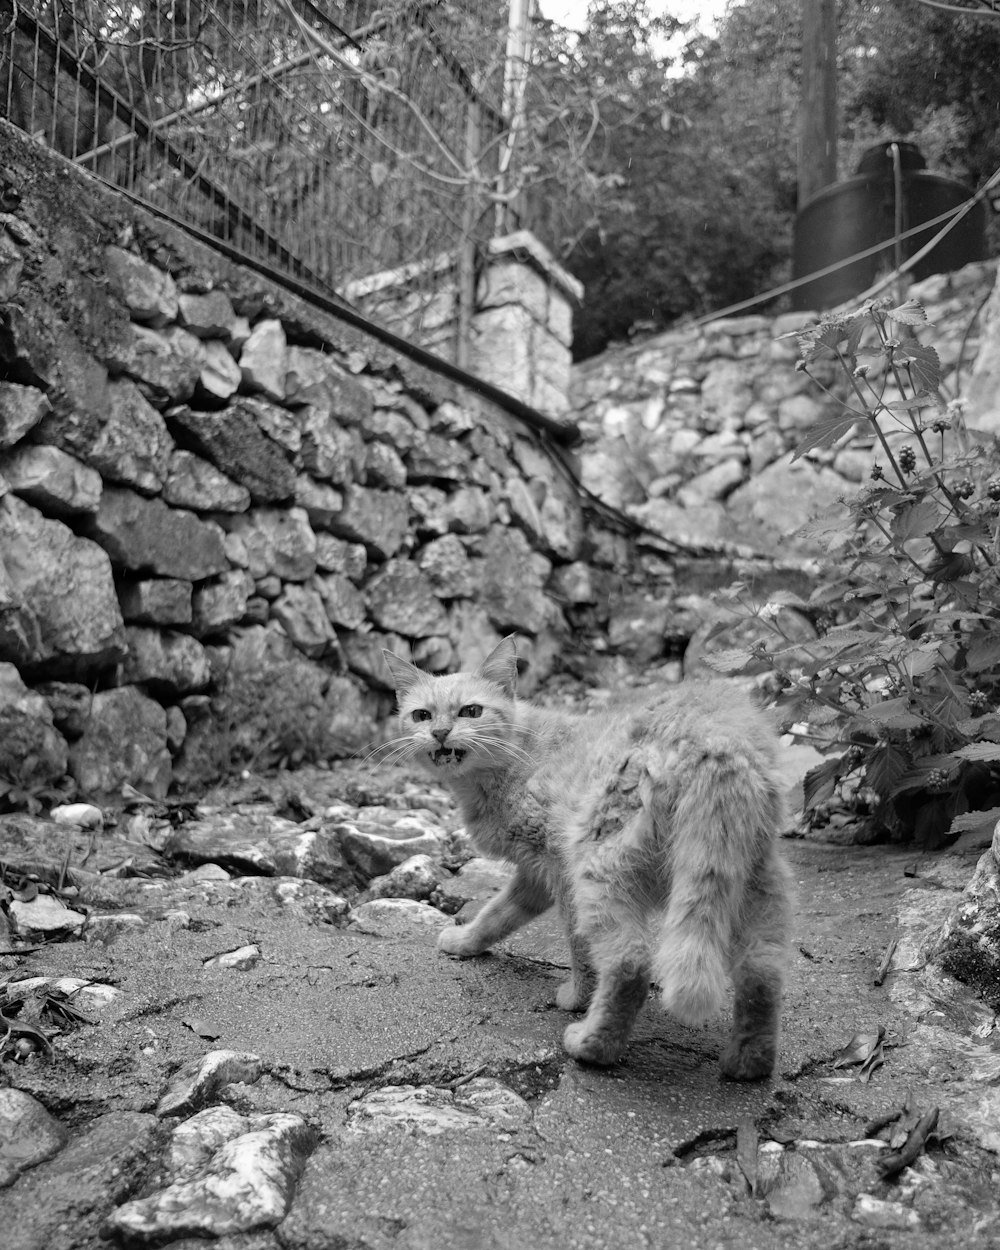 a raccoon walking on a path by a stone wall